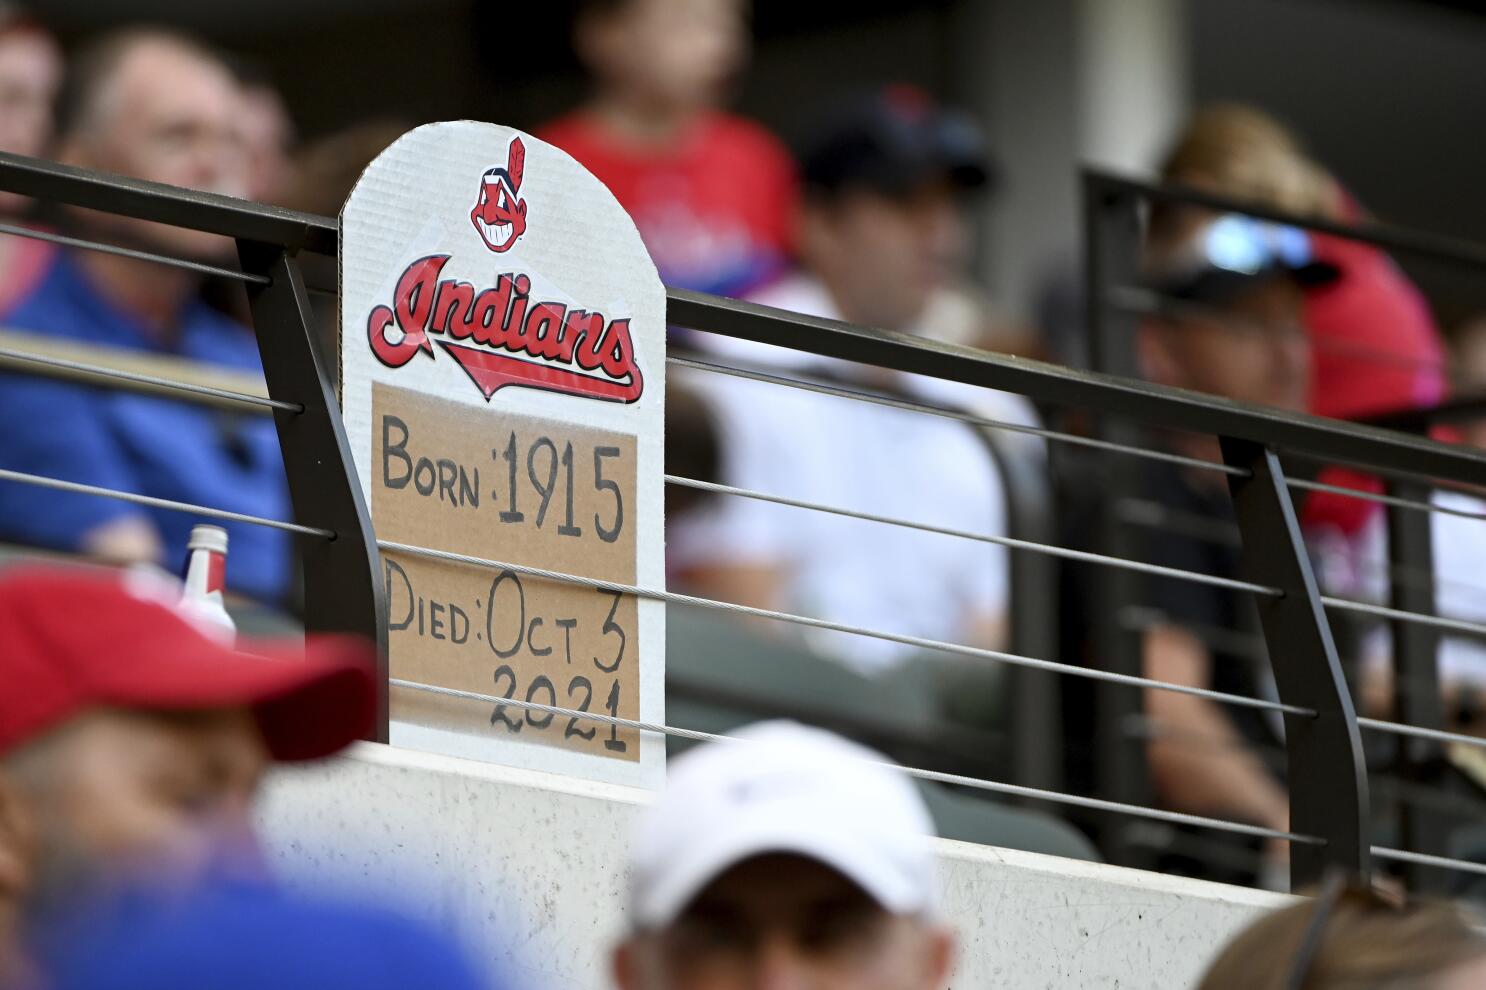 It's time for Major League Baseball to take a stand on Chief Wahoo